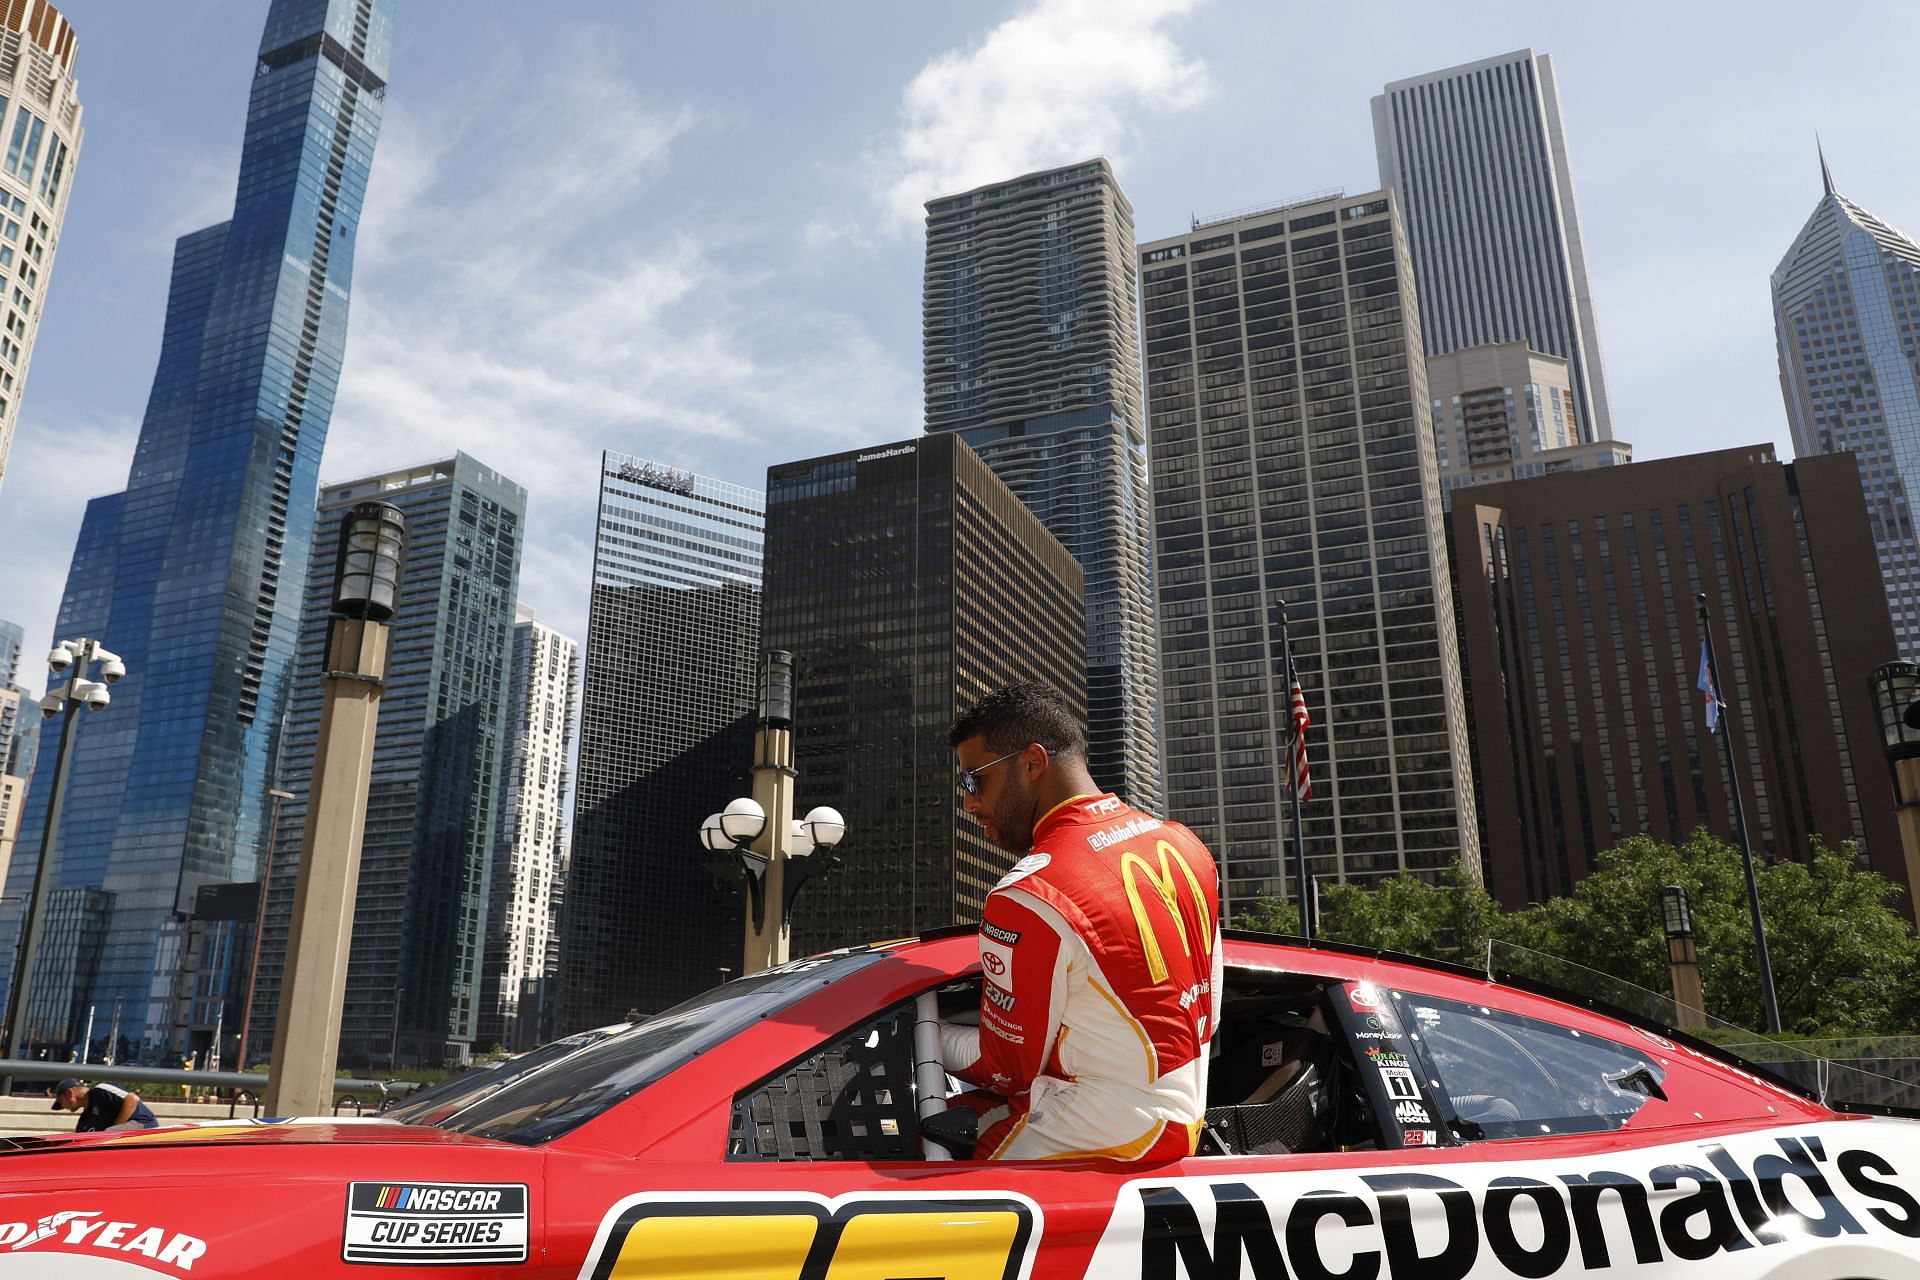 Bubba Wallace Jr. gets into his car before driving around downtown Chicago in promotion of the 2023 NASCAR Chicago Street Race announcement in Chicago, Illinois (Photo by Patrick McDermott/Getty Images)